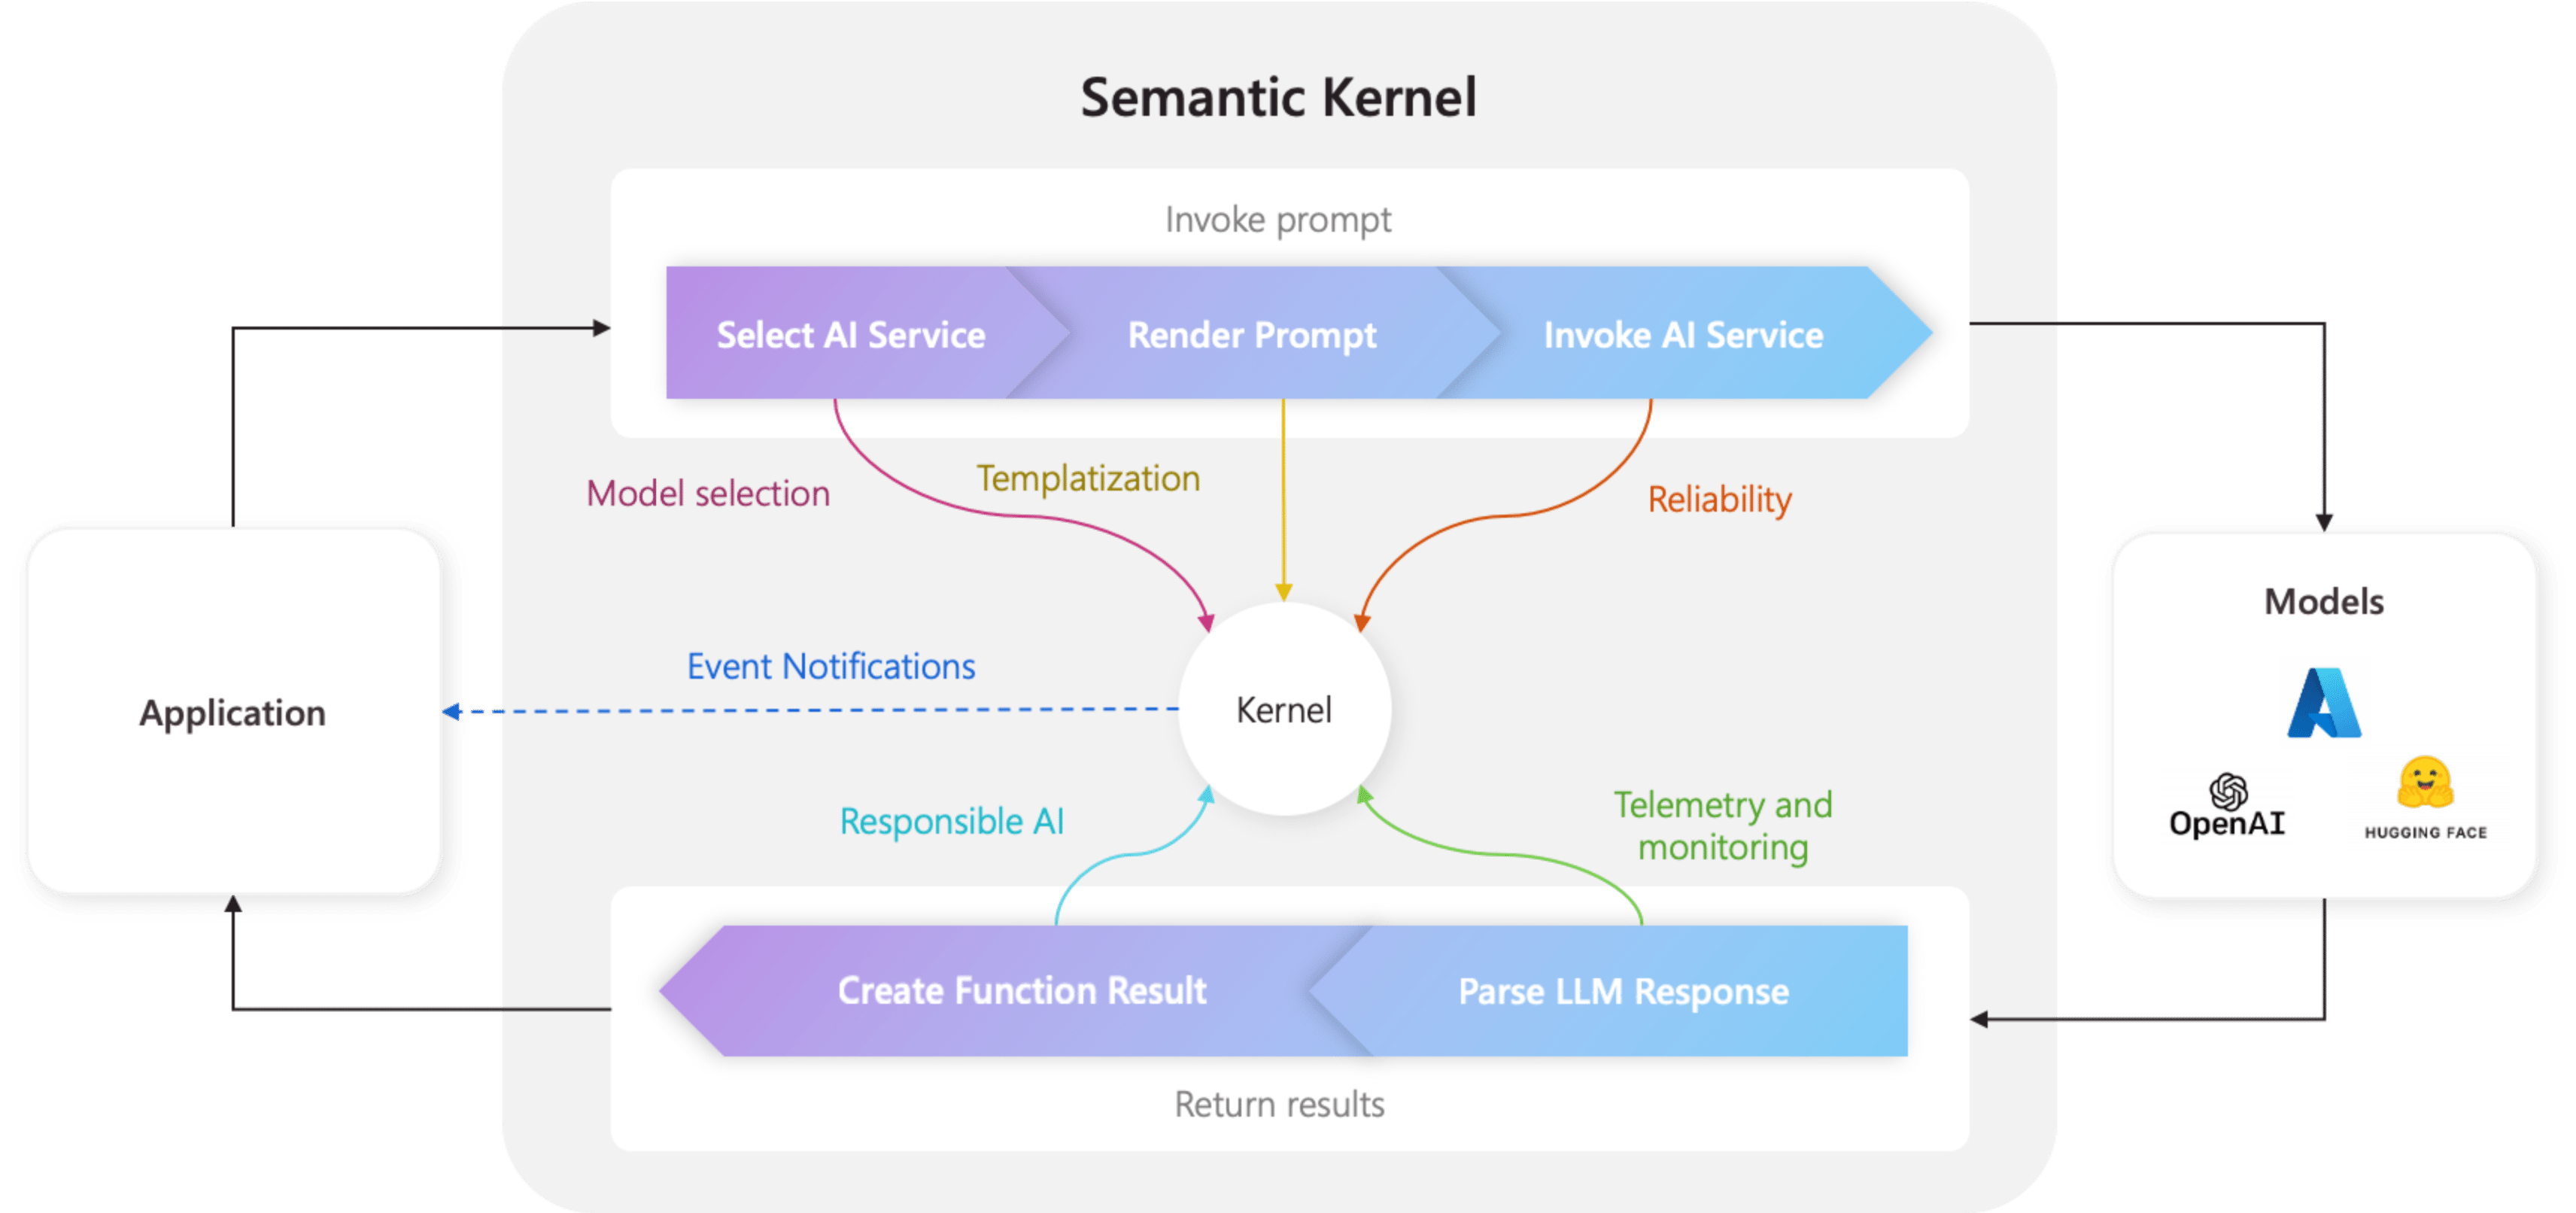 The kernel is at the center of everything in Semantic Kernel